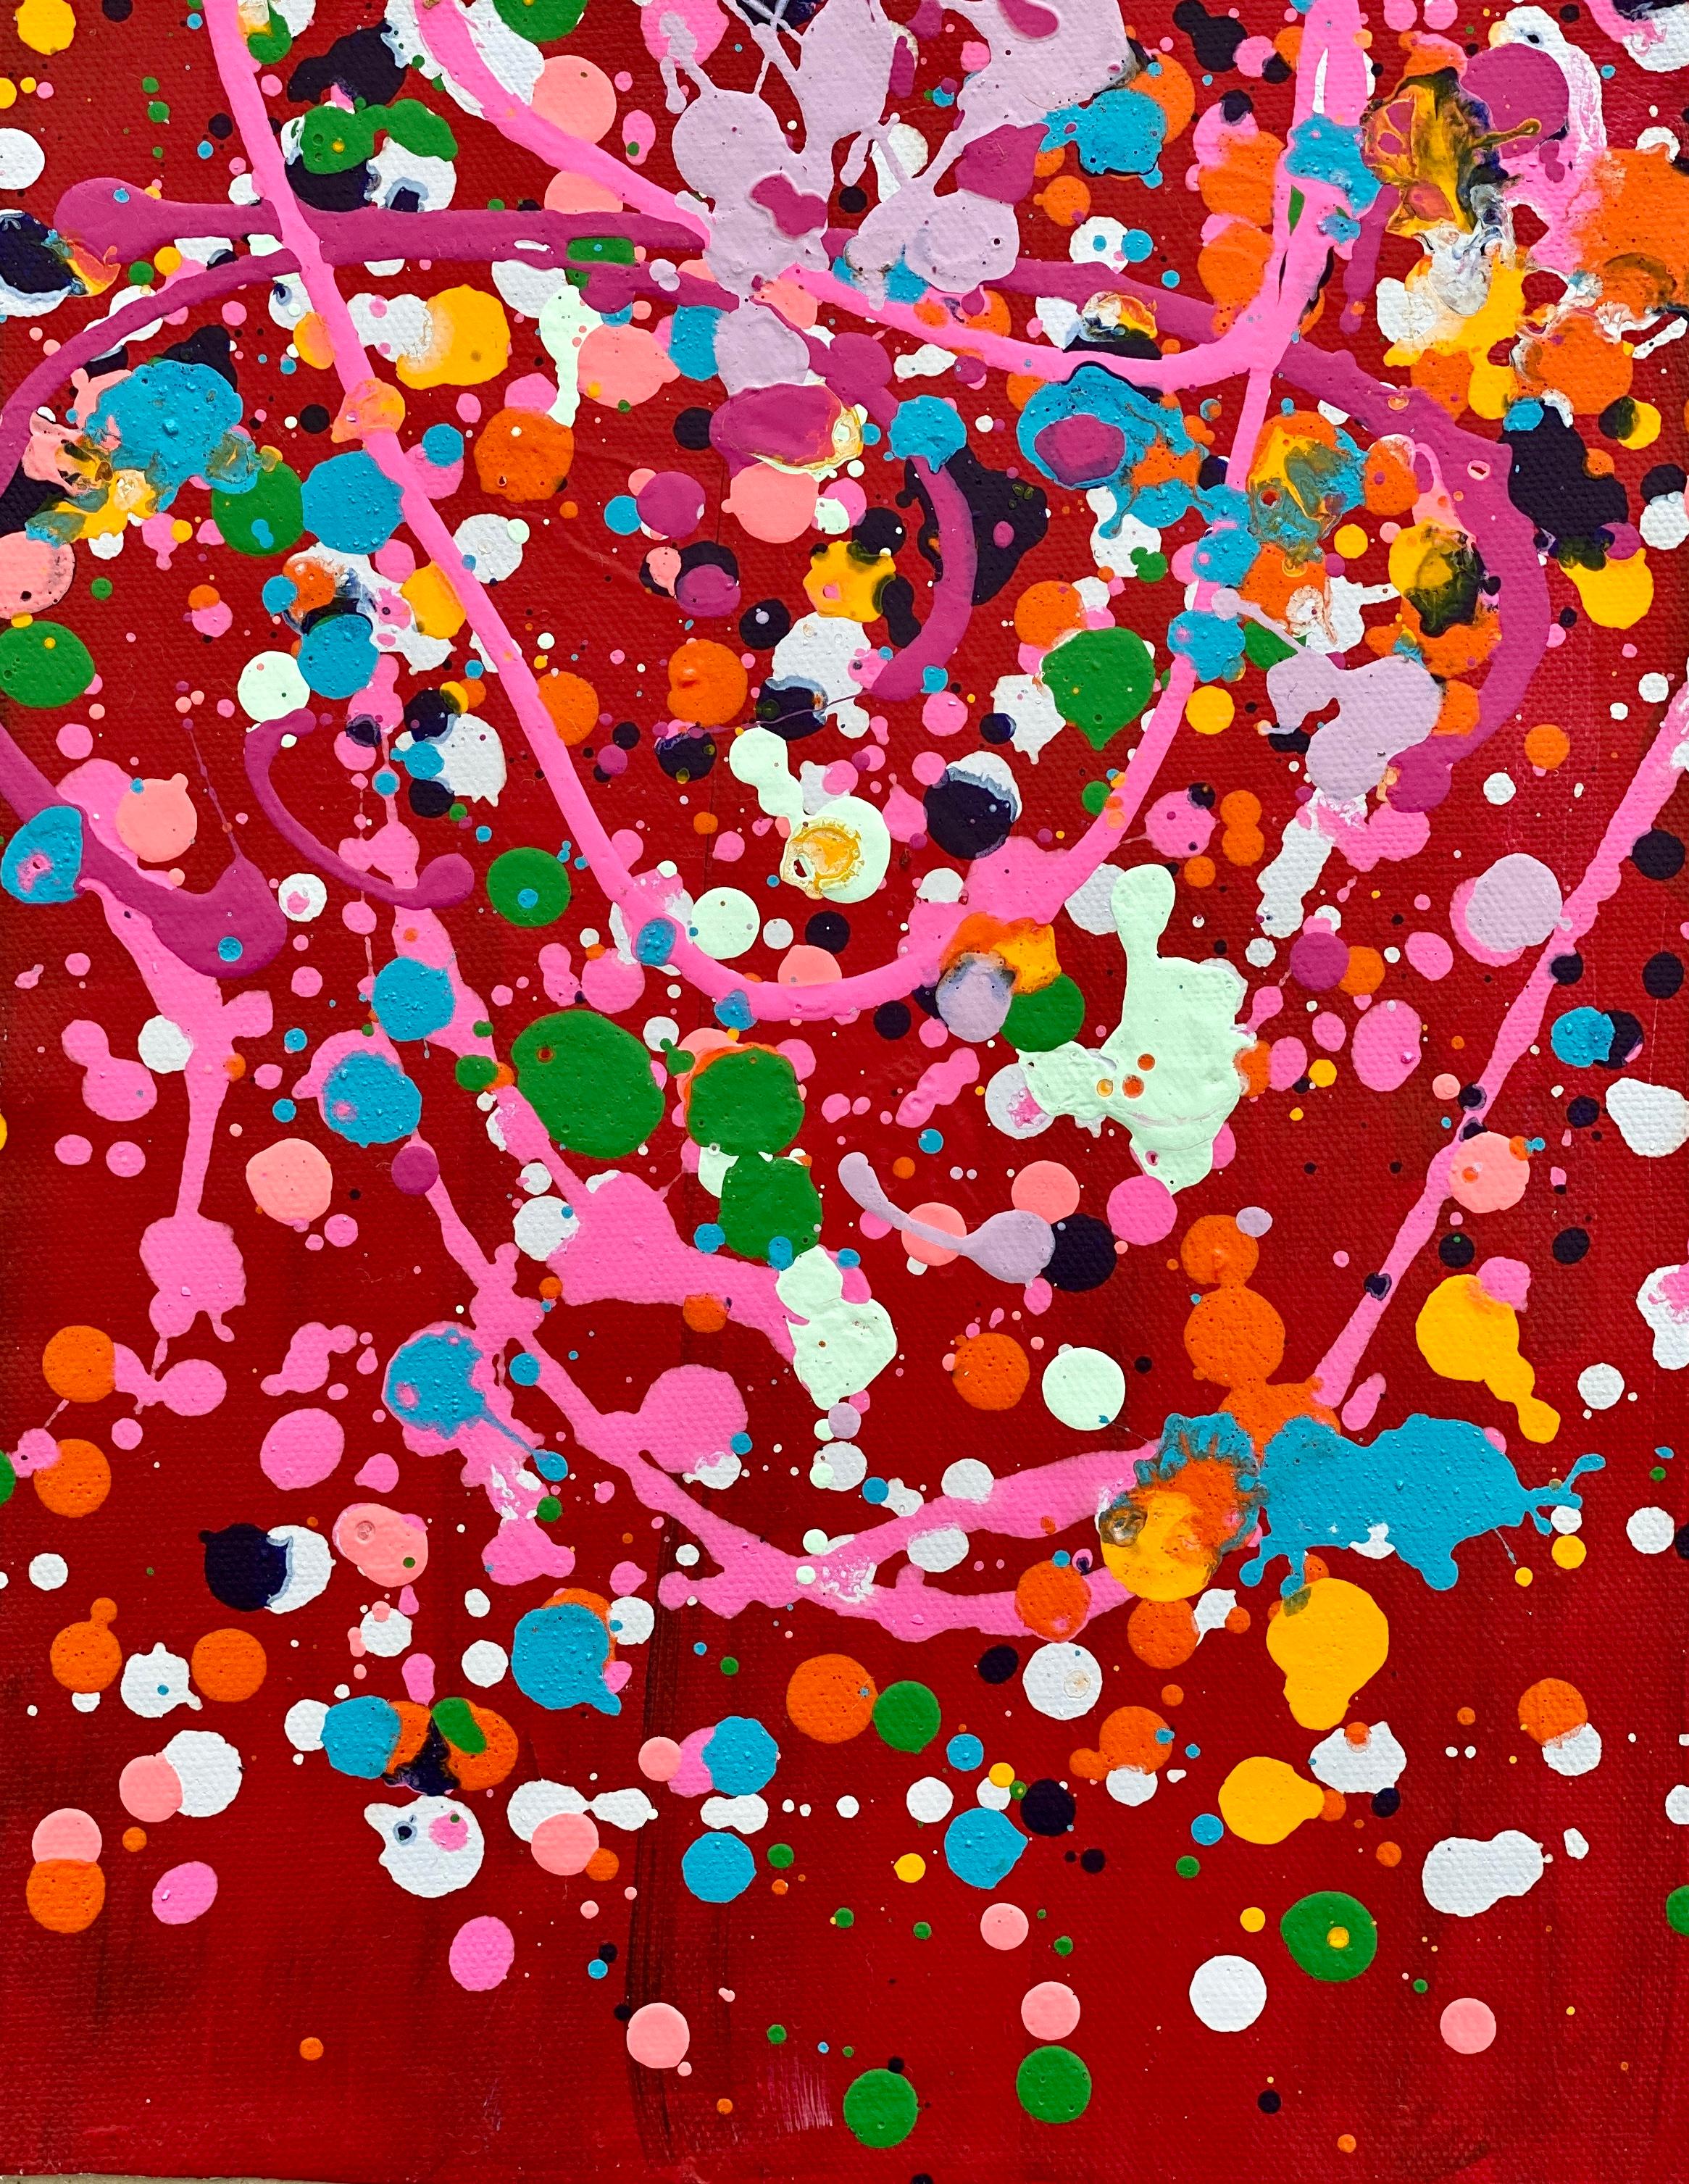 Kathleen Rhee Abstract Painting - Colorful spatter no8 drip abstract expressionist Jackson Pollock red pink green